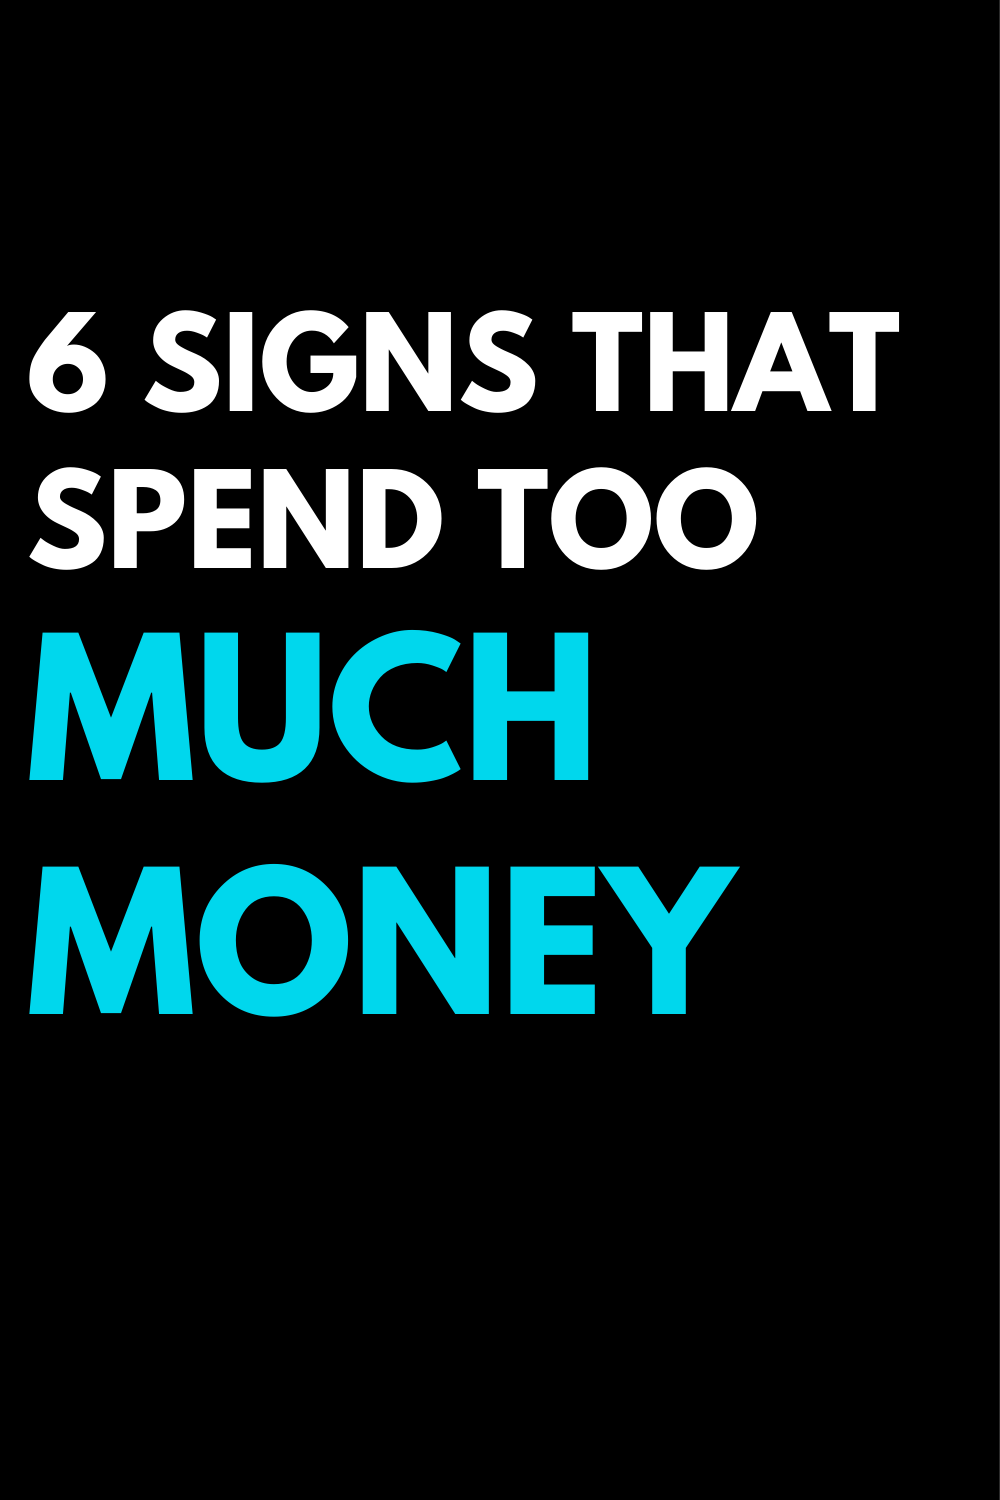 6 signs that spend too much money